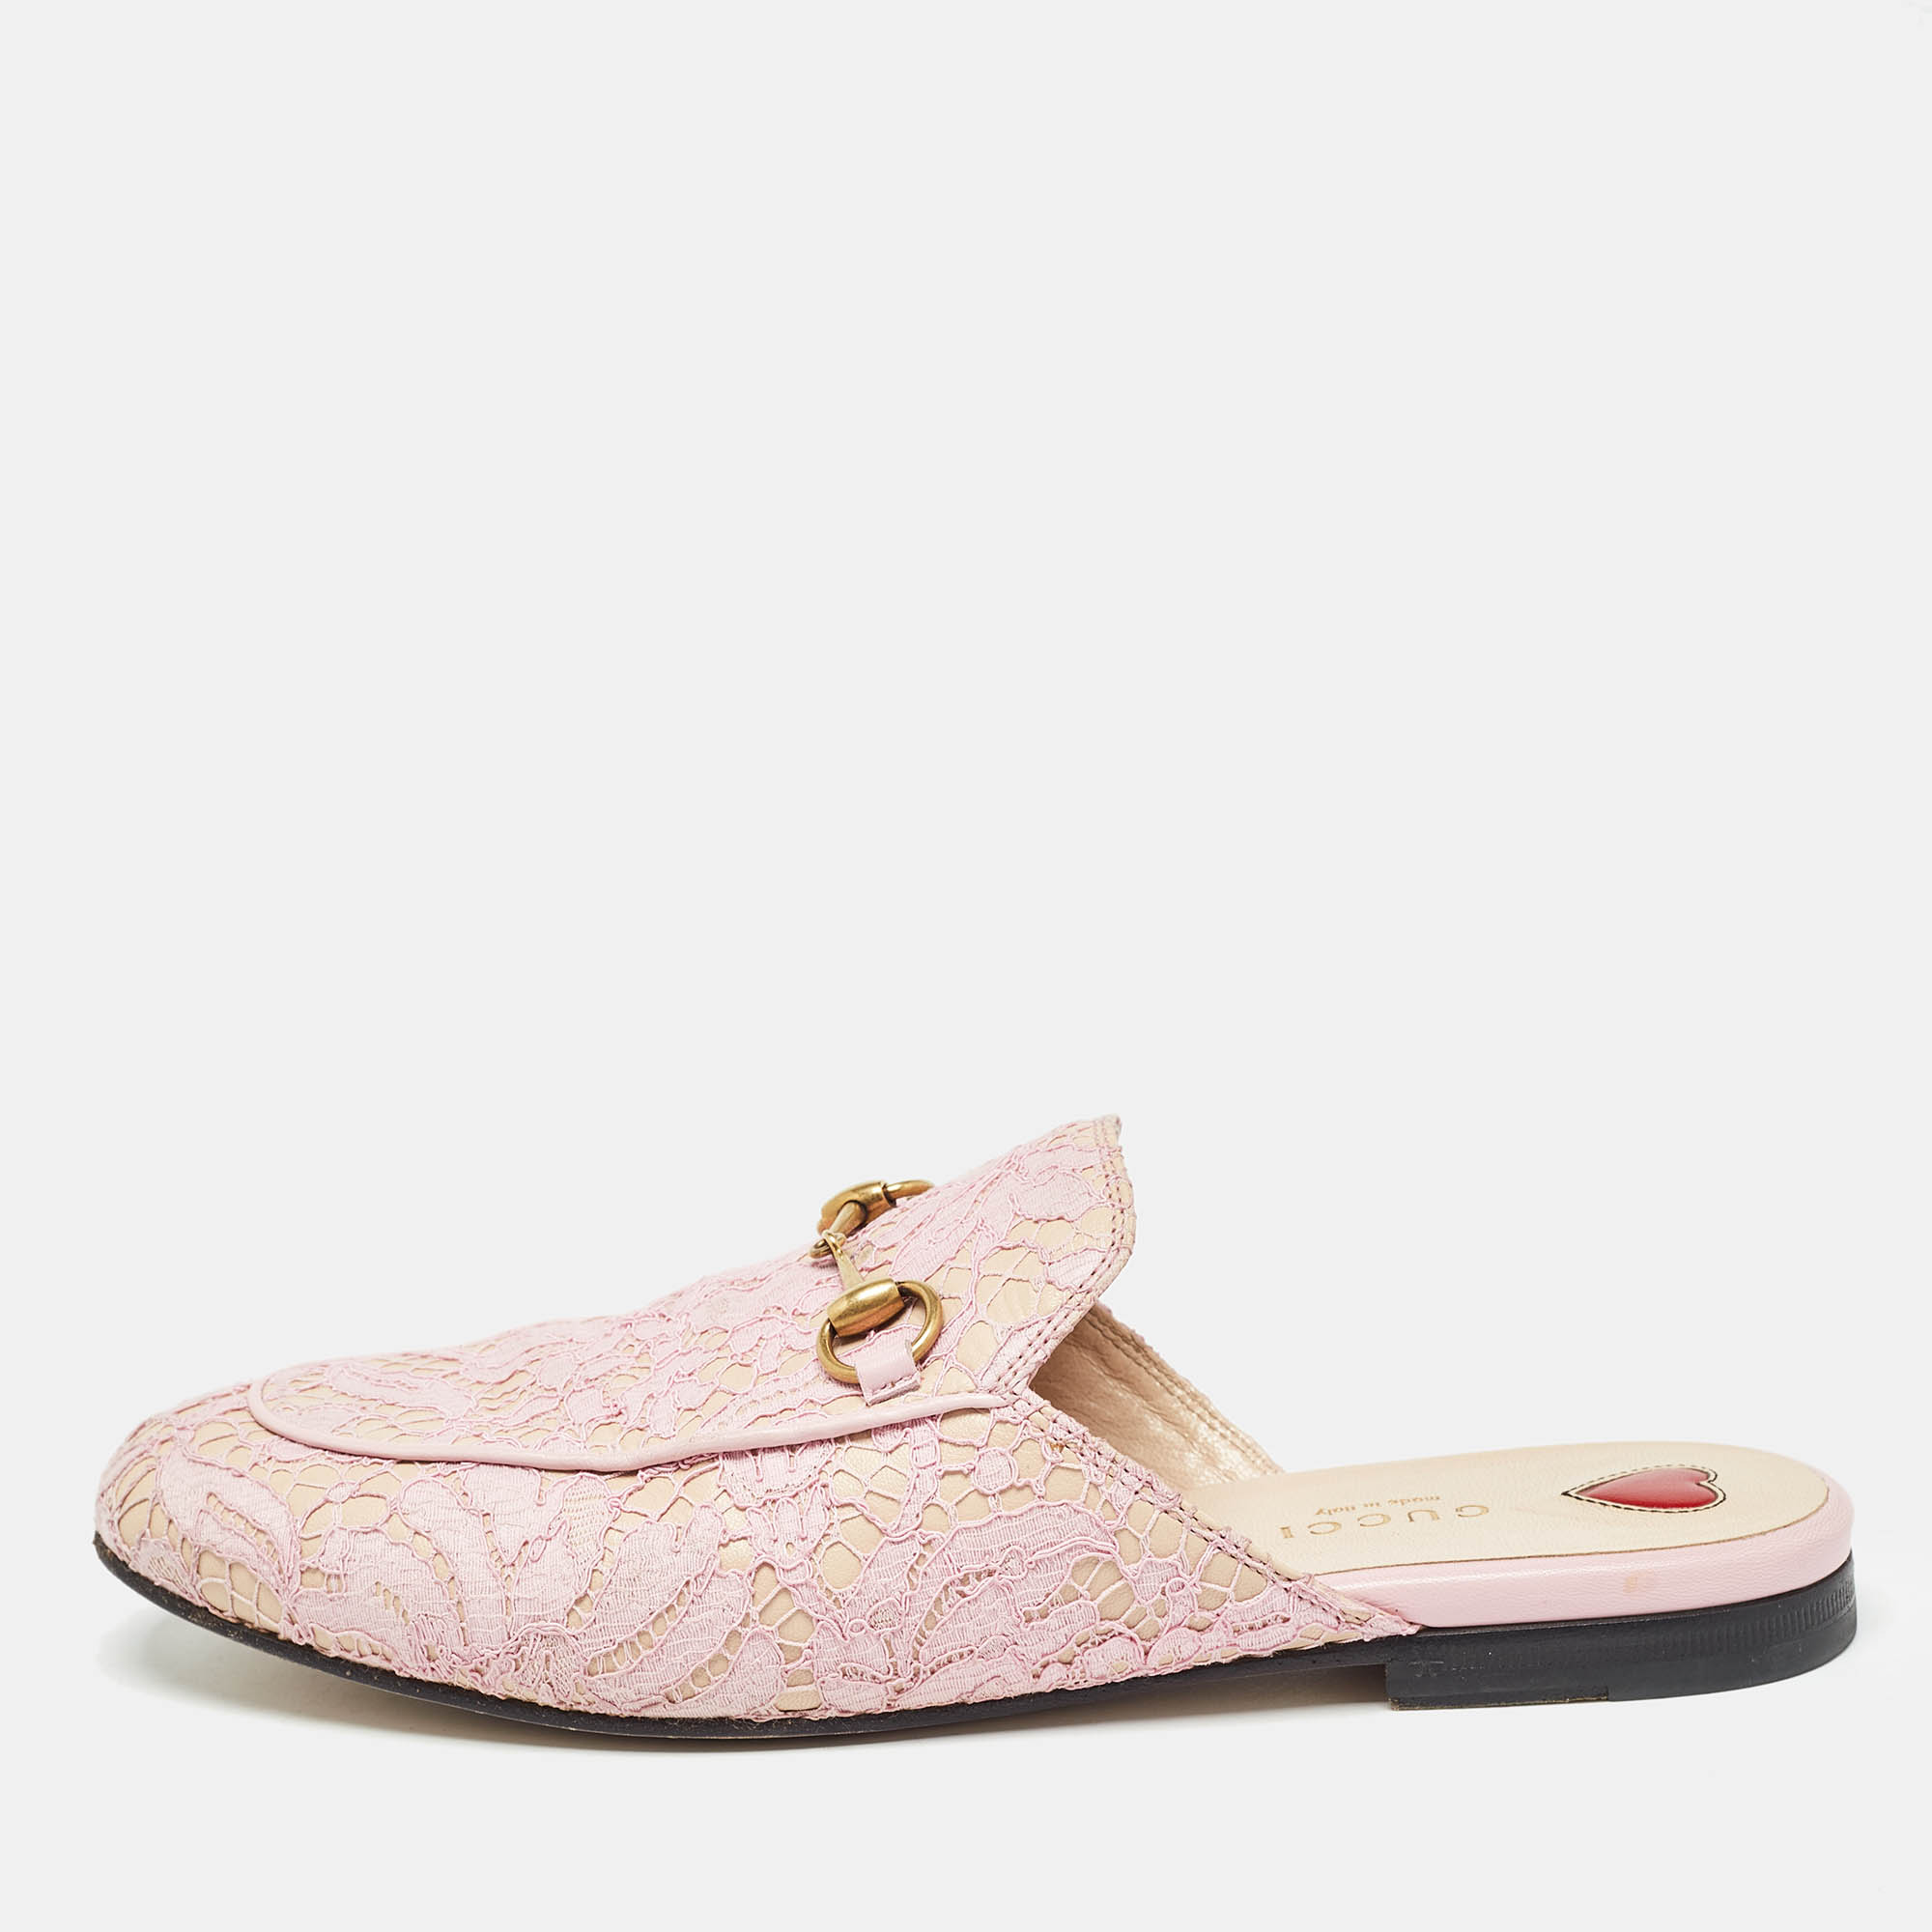 Gucci pink/beige lace and leather princetown flat mules size 38